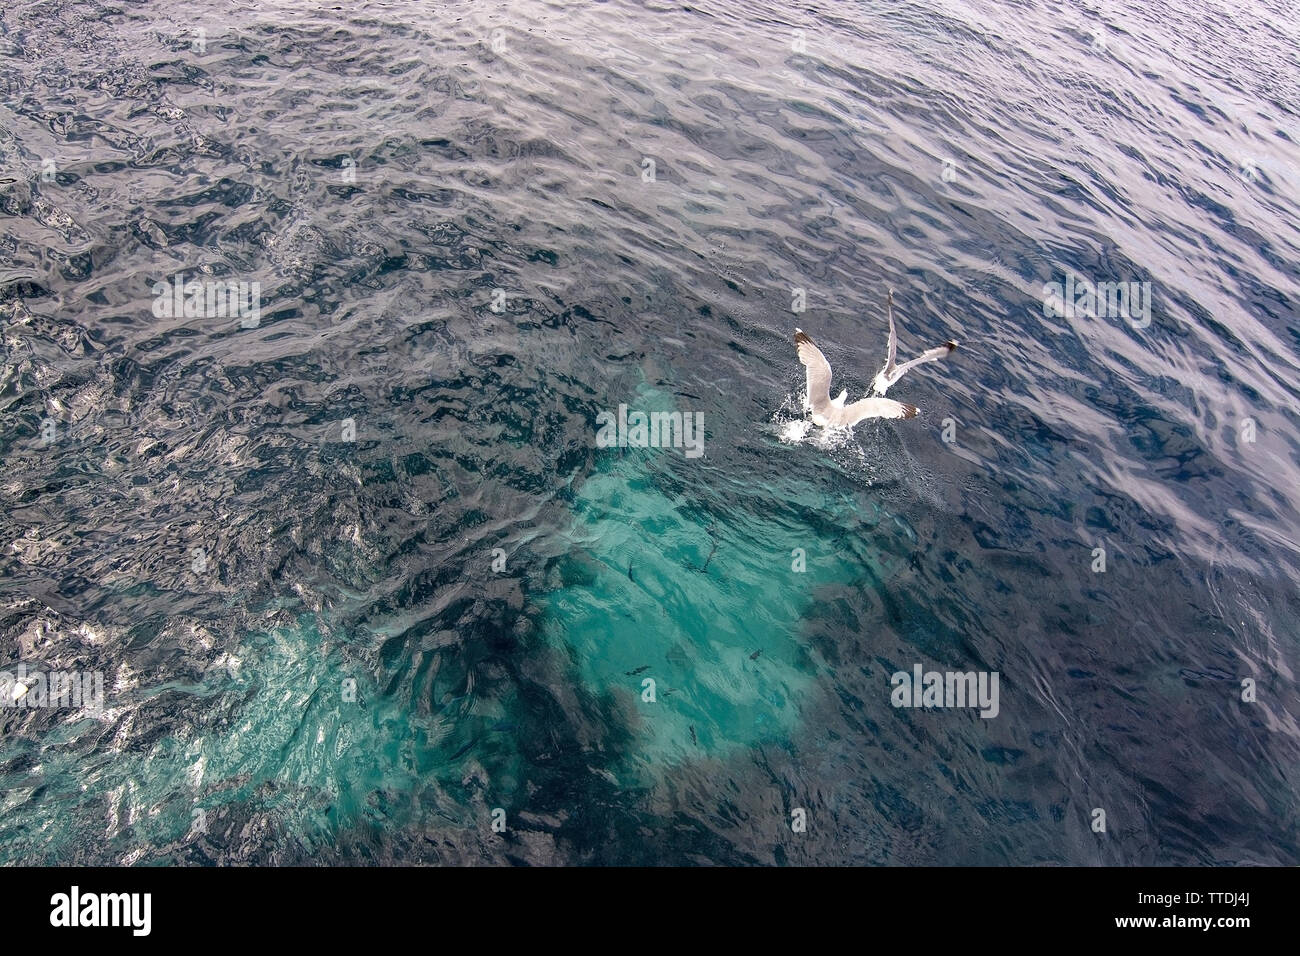 Seagulls hunting for fish visible in clear Mediterranean azure water outside Mallorca coast closeup. Stock Photo